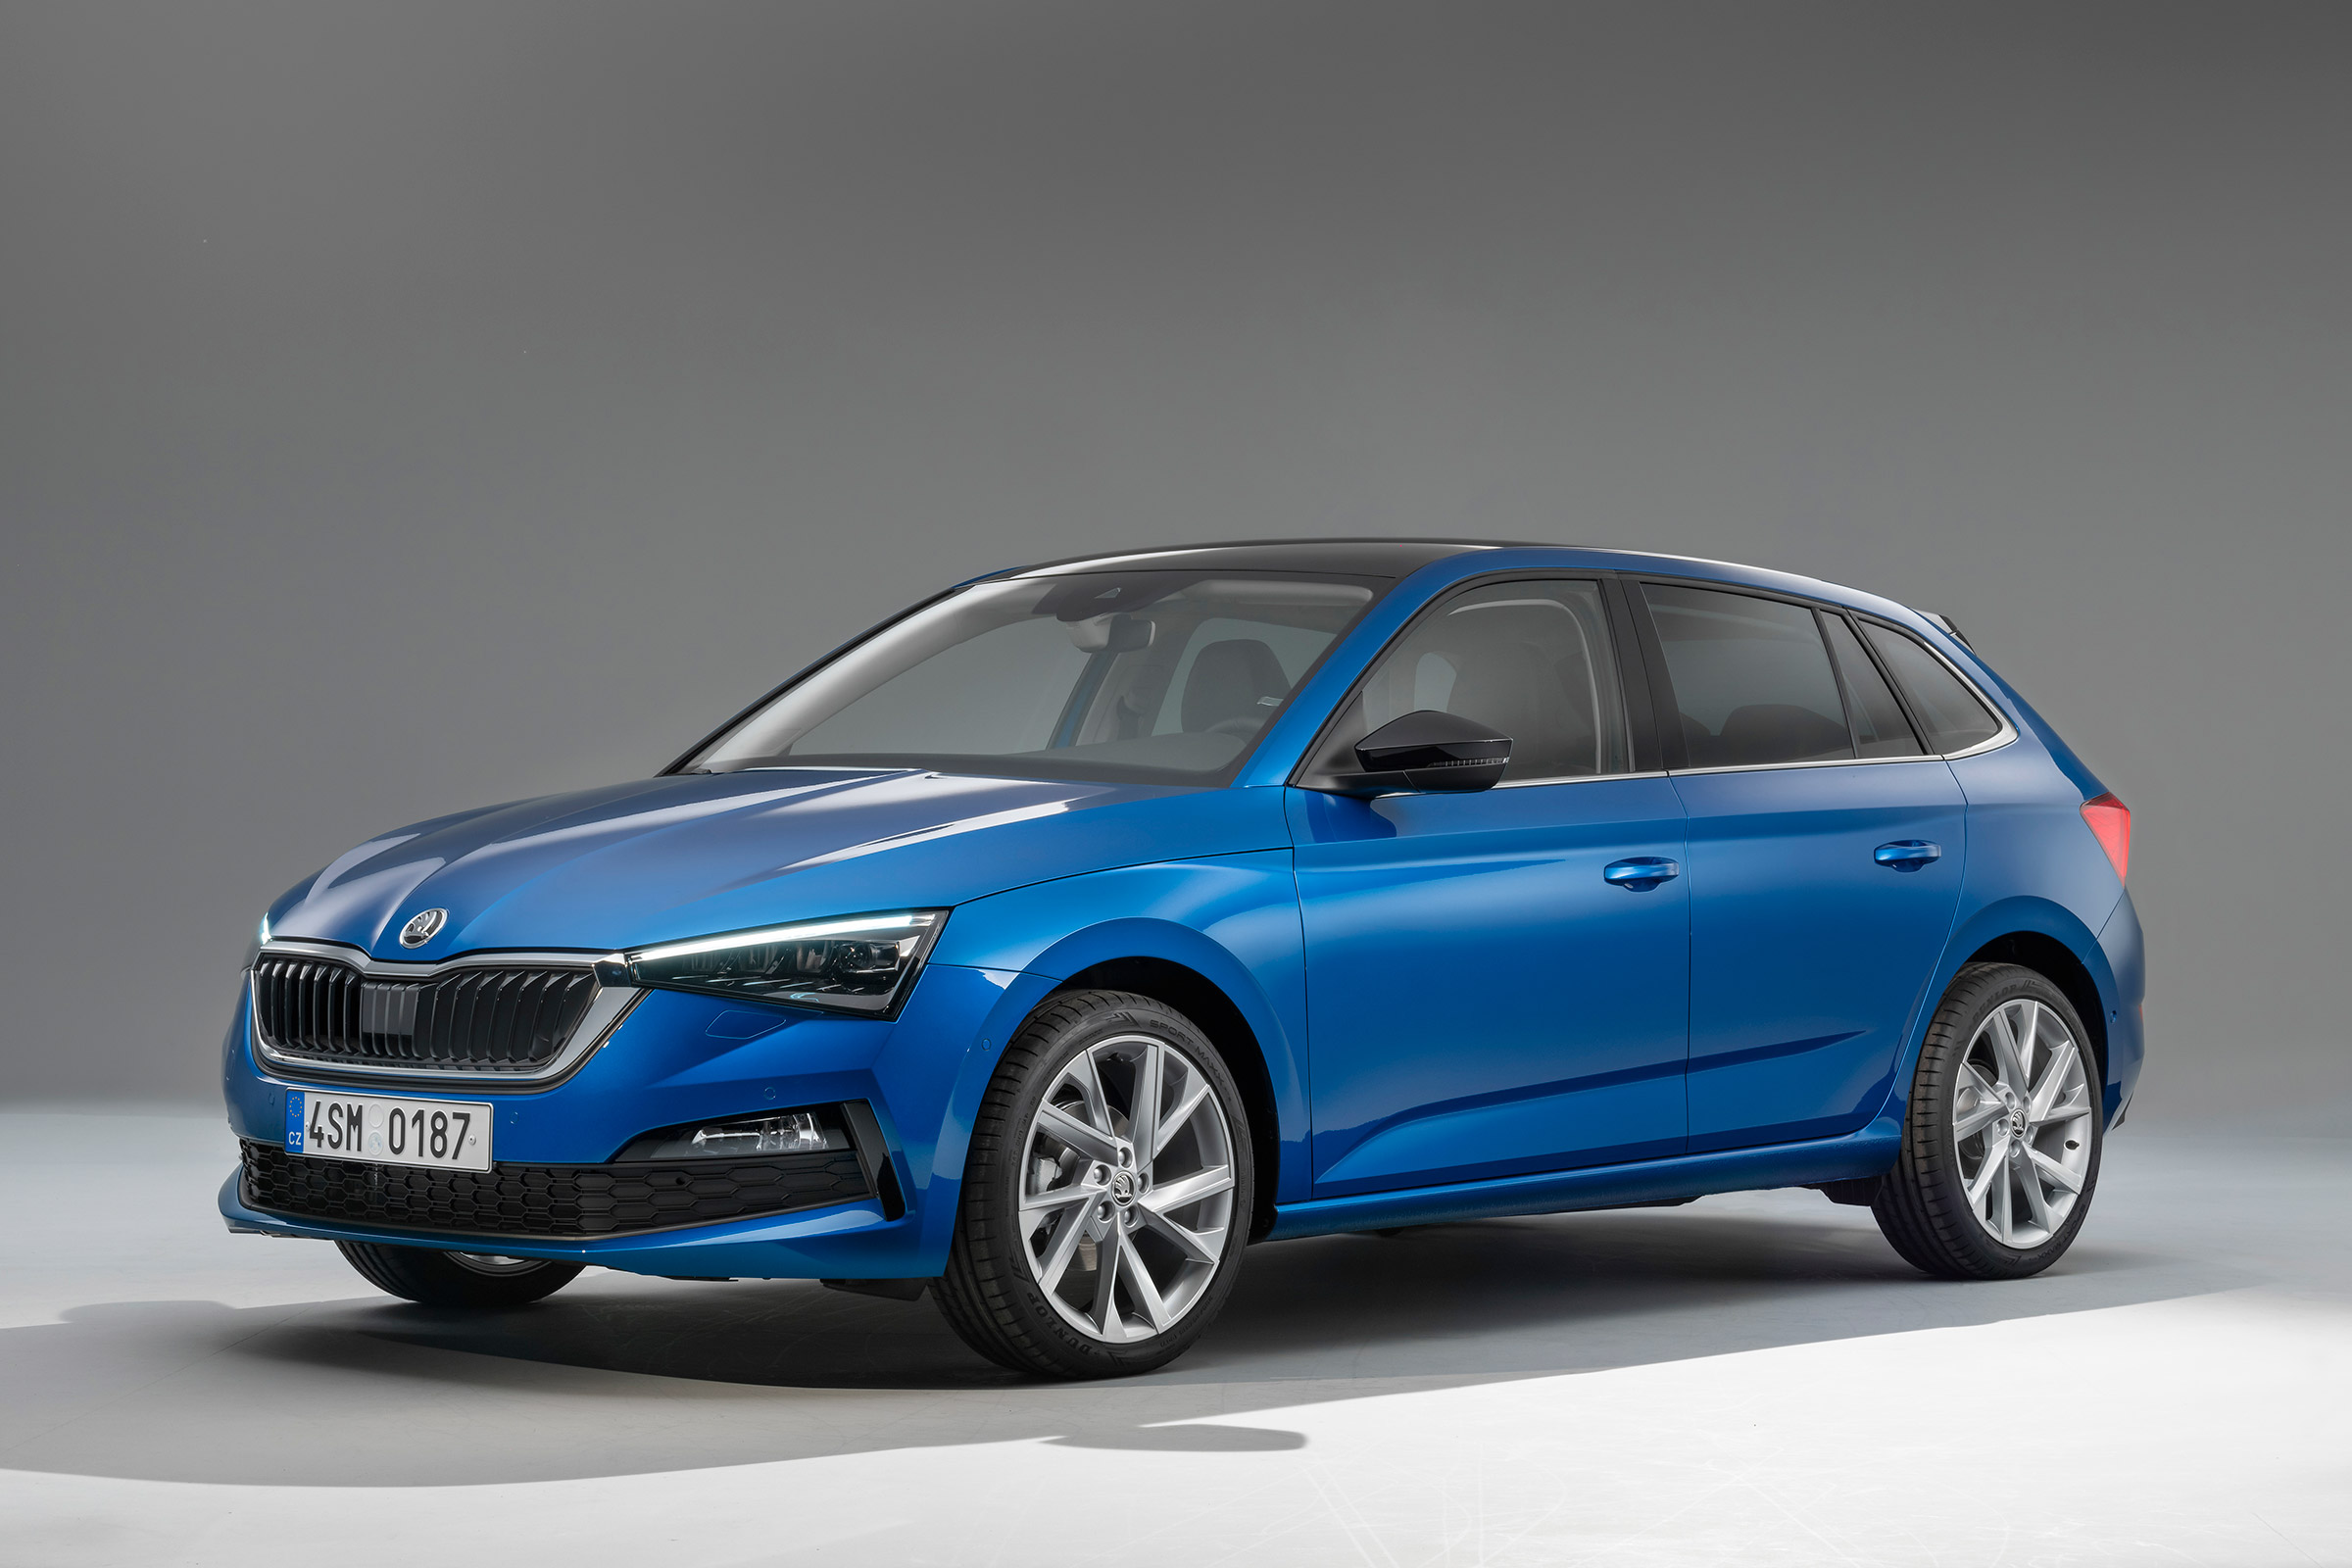 New 2019 Skoda Scala: pricing and specs revealed ahead of 